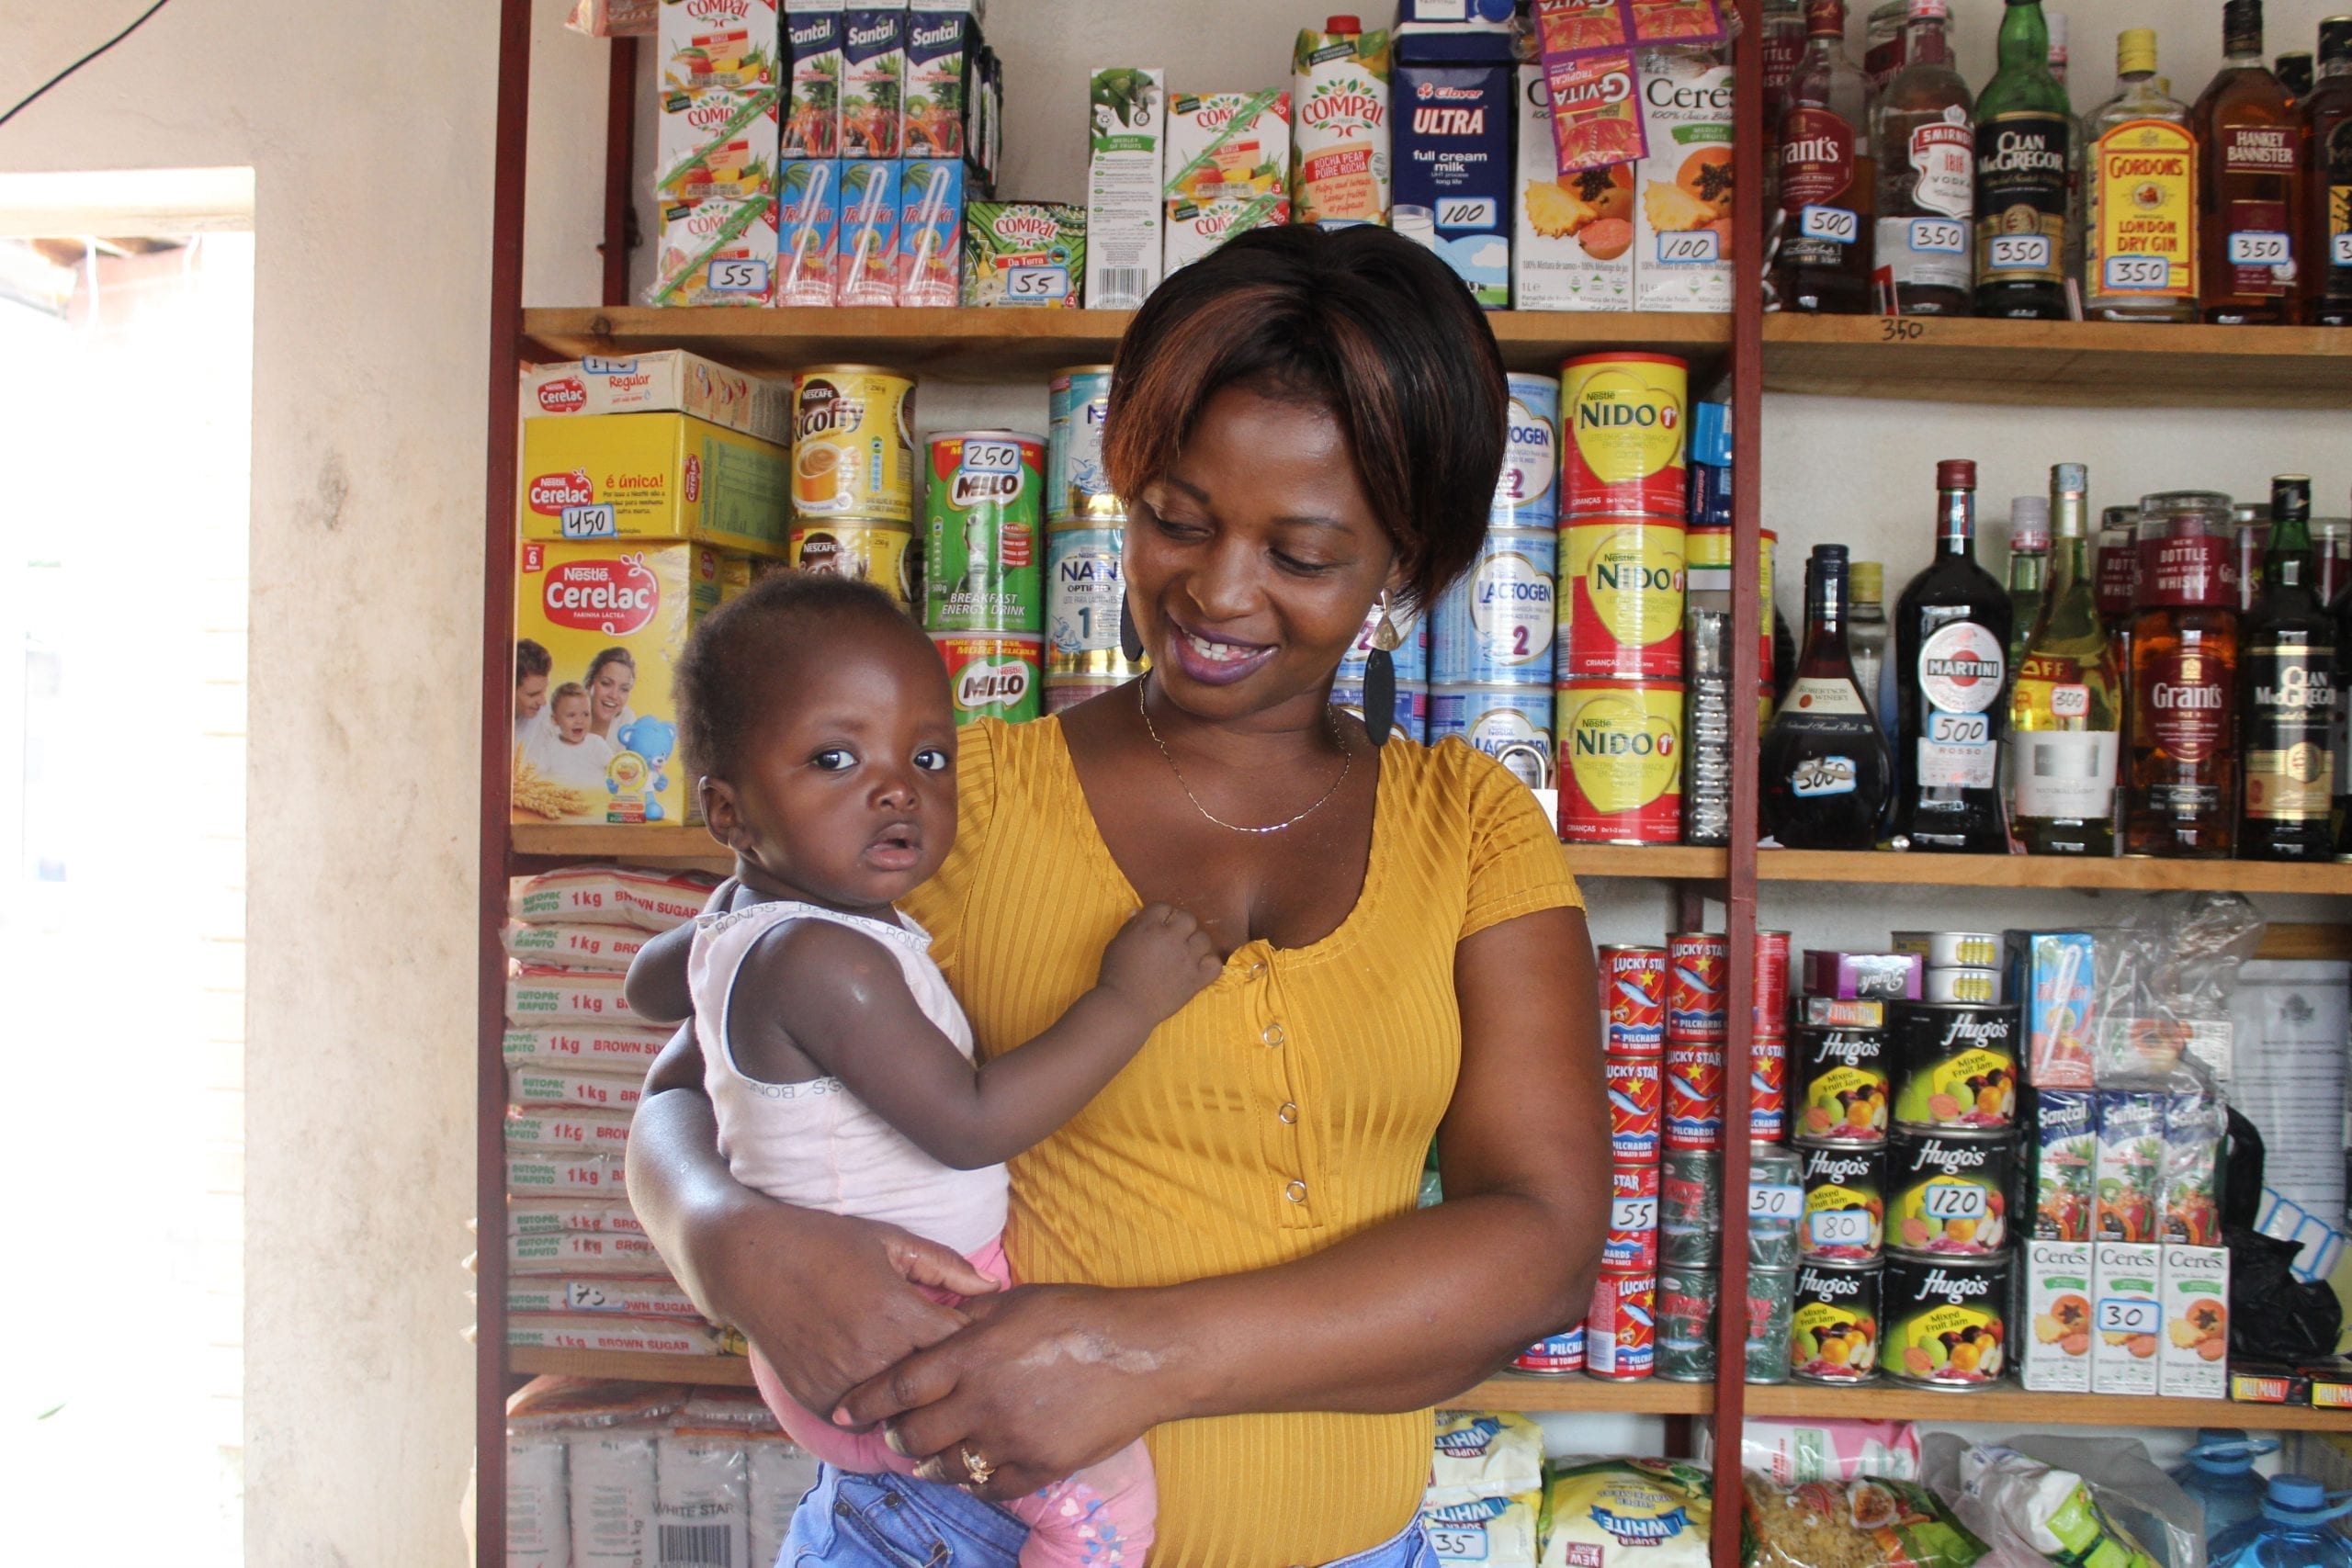 Many women leaders in developing countries are also mothers, like Bernadette Sambo who owns a small grocery store near Maputo, Mozambique.